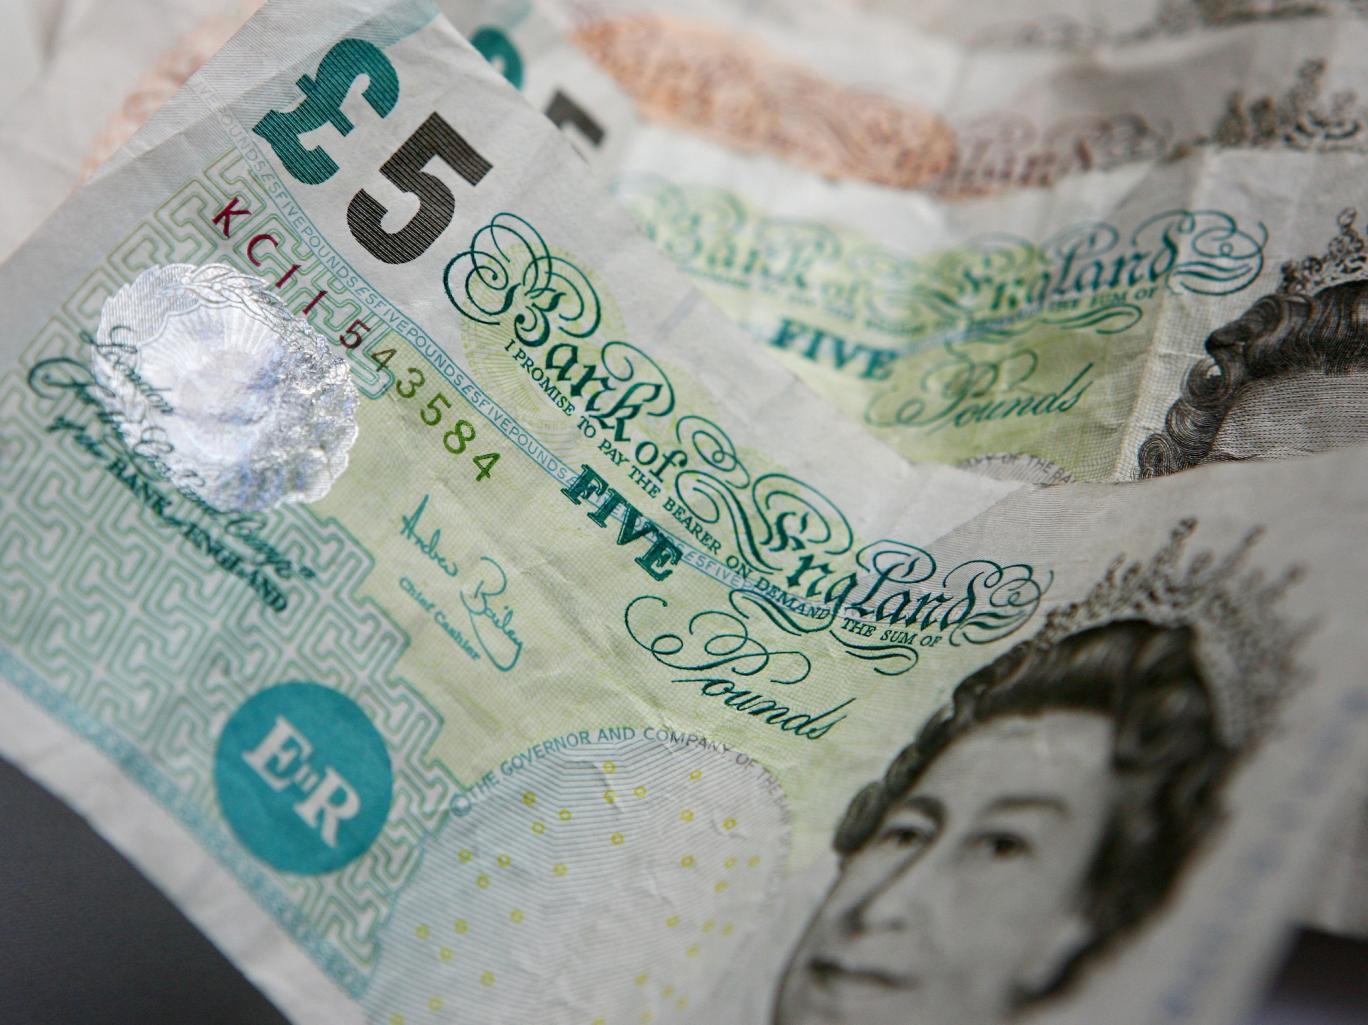 Tomorrow is your last chance to spend old paper £5 notes